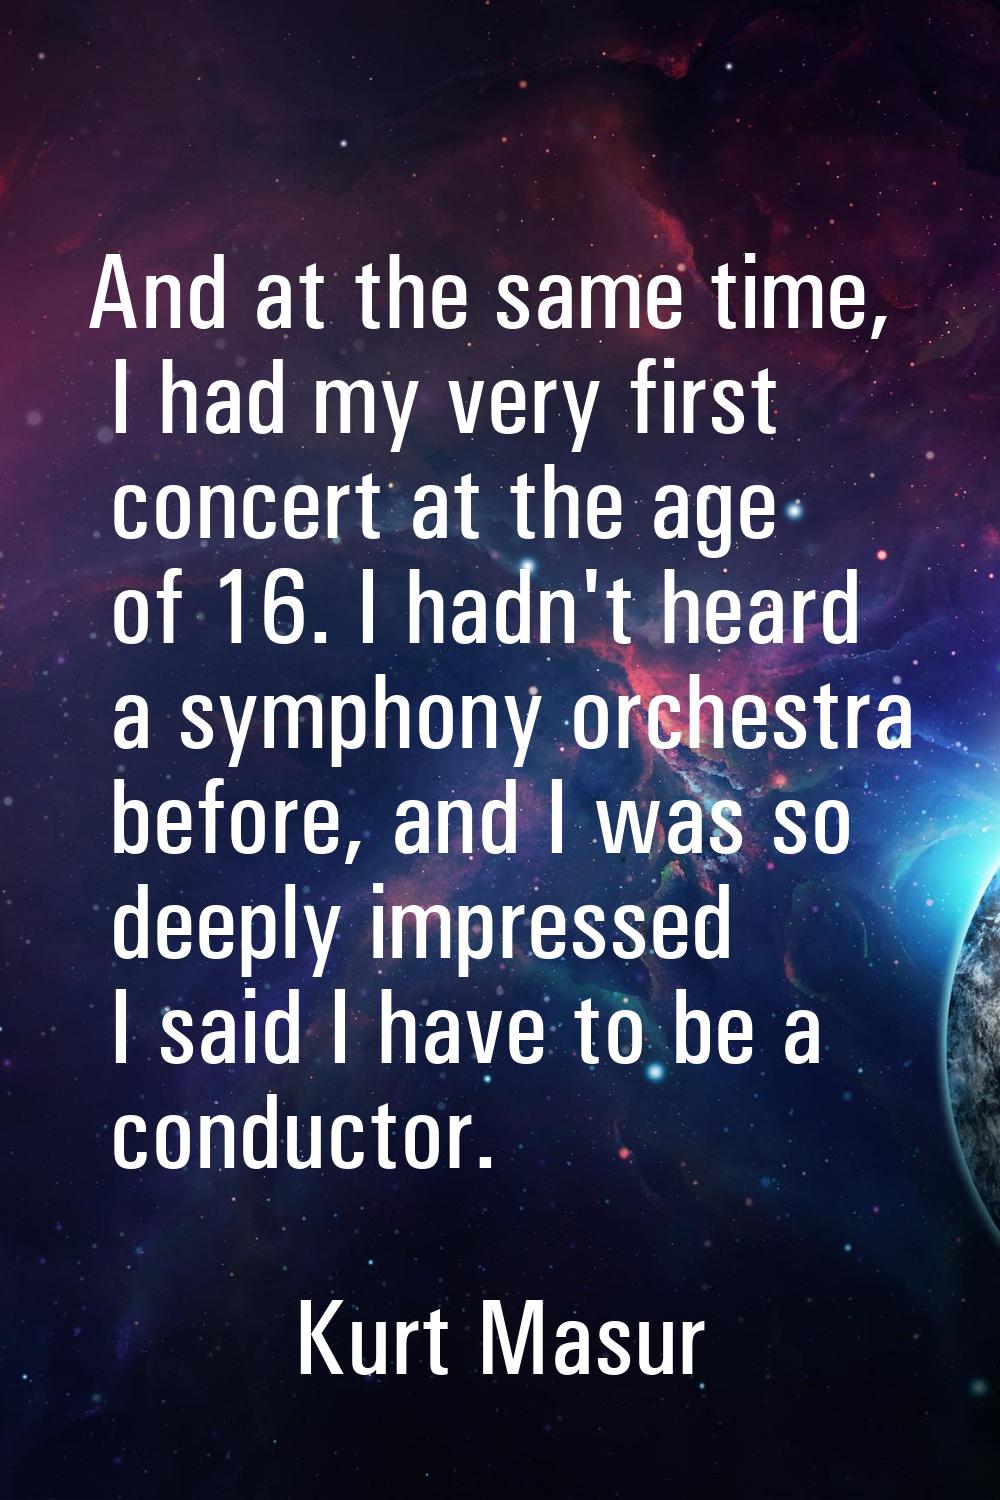 And at the same time, I had my very first concert at the age of 16. I hadn't heard a symphony orche